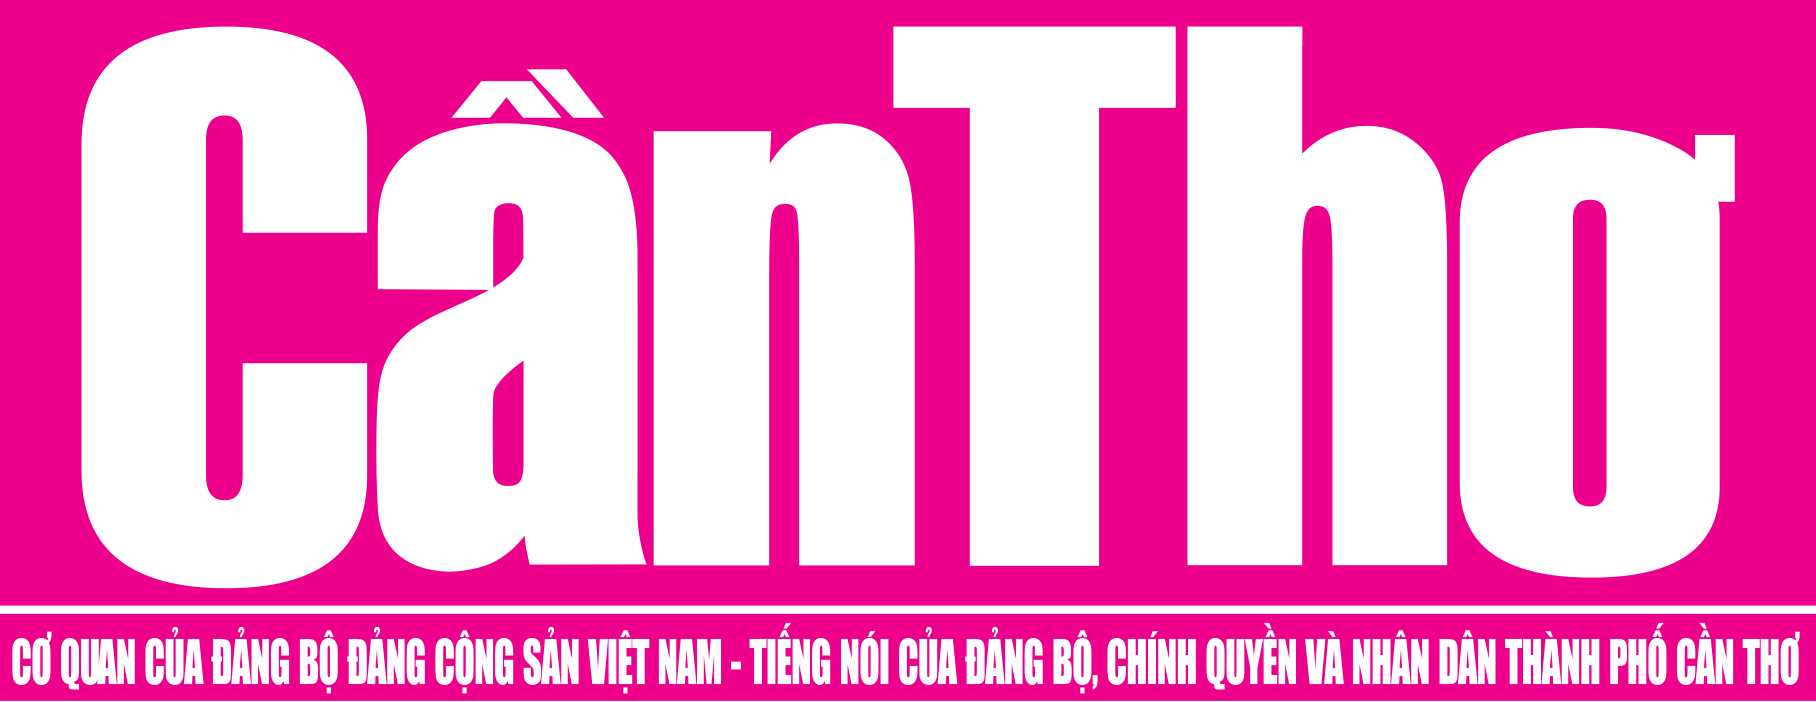 //techfestcantho.vn/files/images/gallery/truyen-thong/Logo-Cantho.png